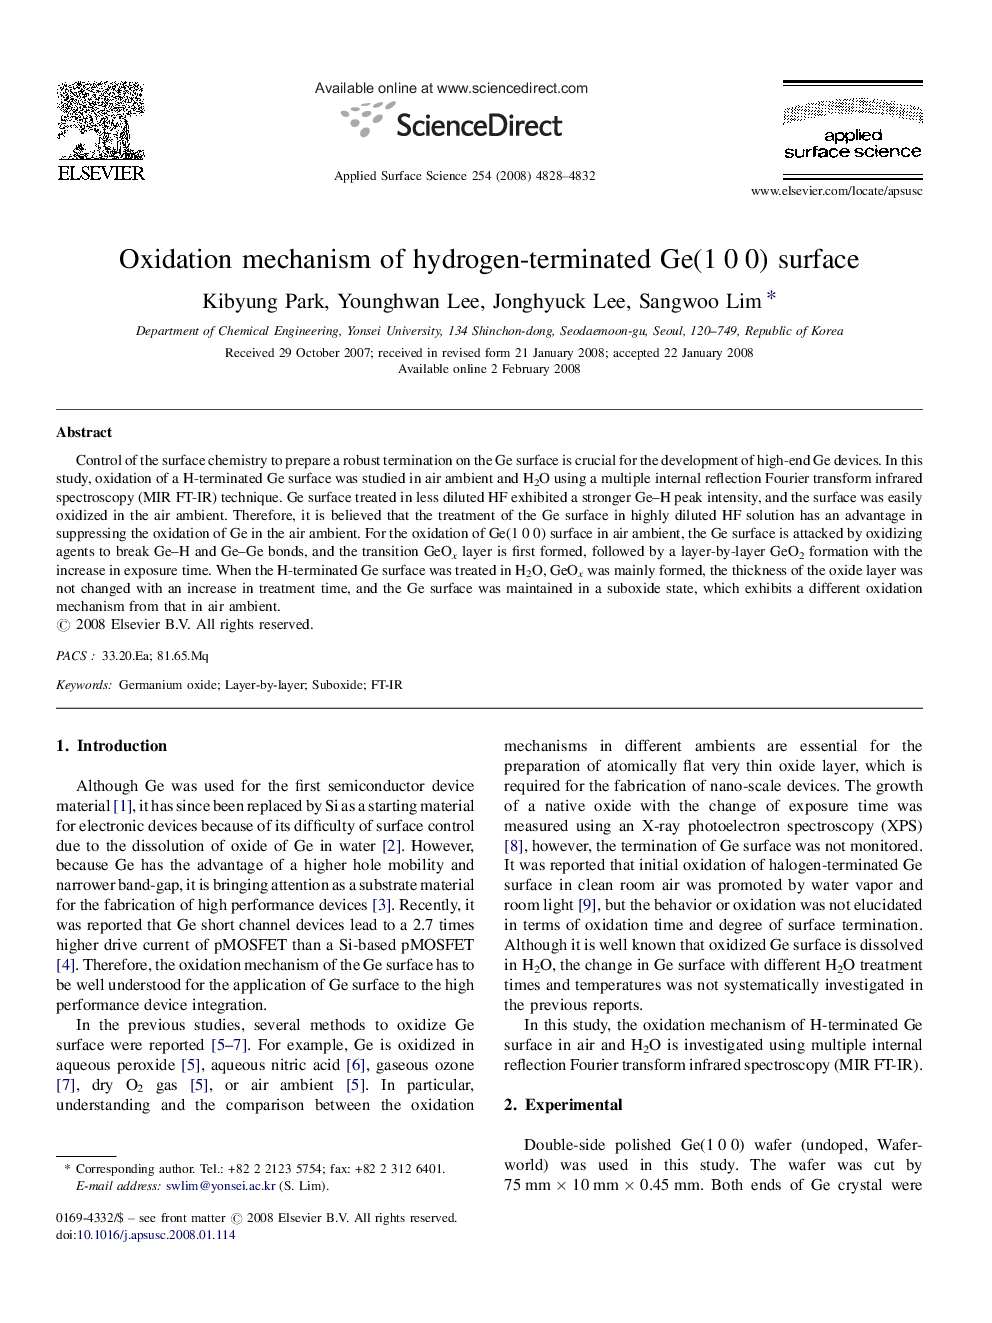 Oxidation mechanism of hydrogen-terminated Ge(1 0 0) surface